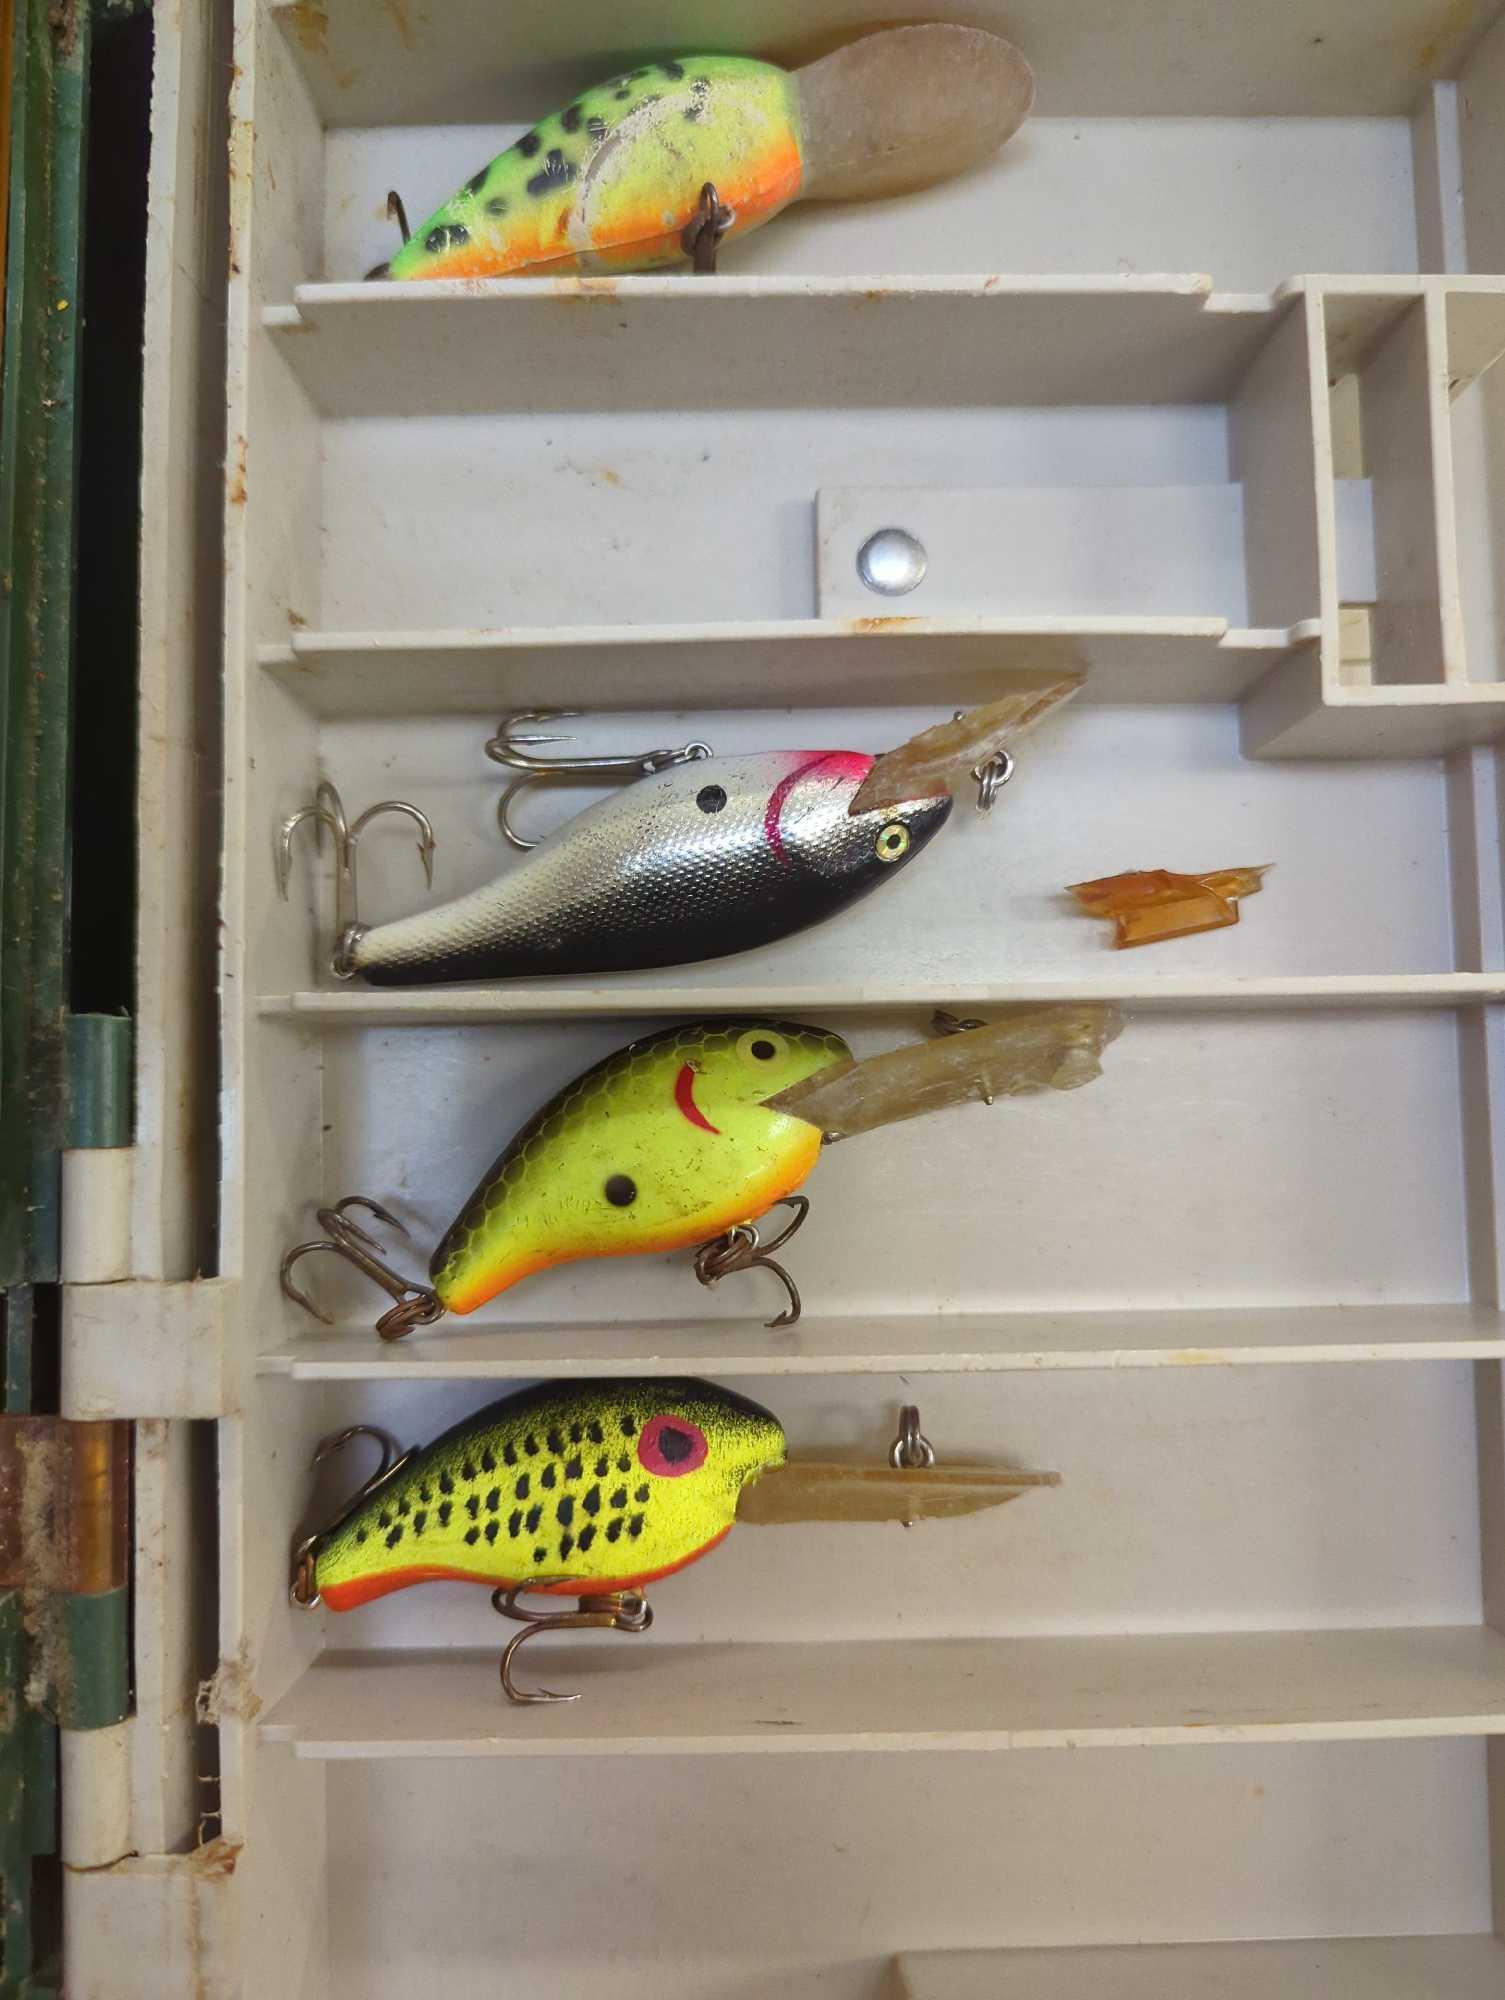 Large tackle box and contents including fishing worm lures and various fishing lures of similar